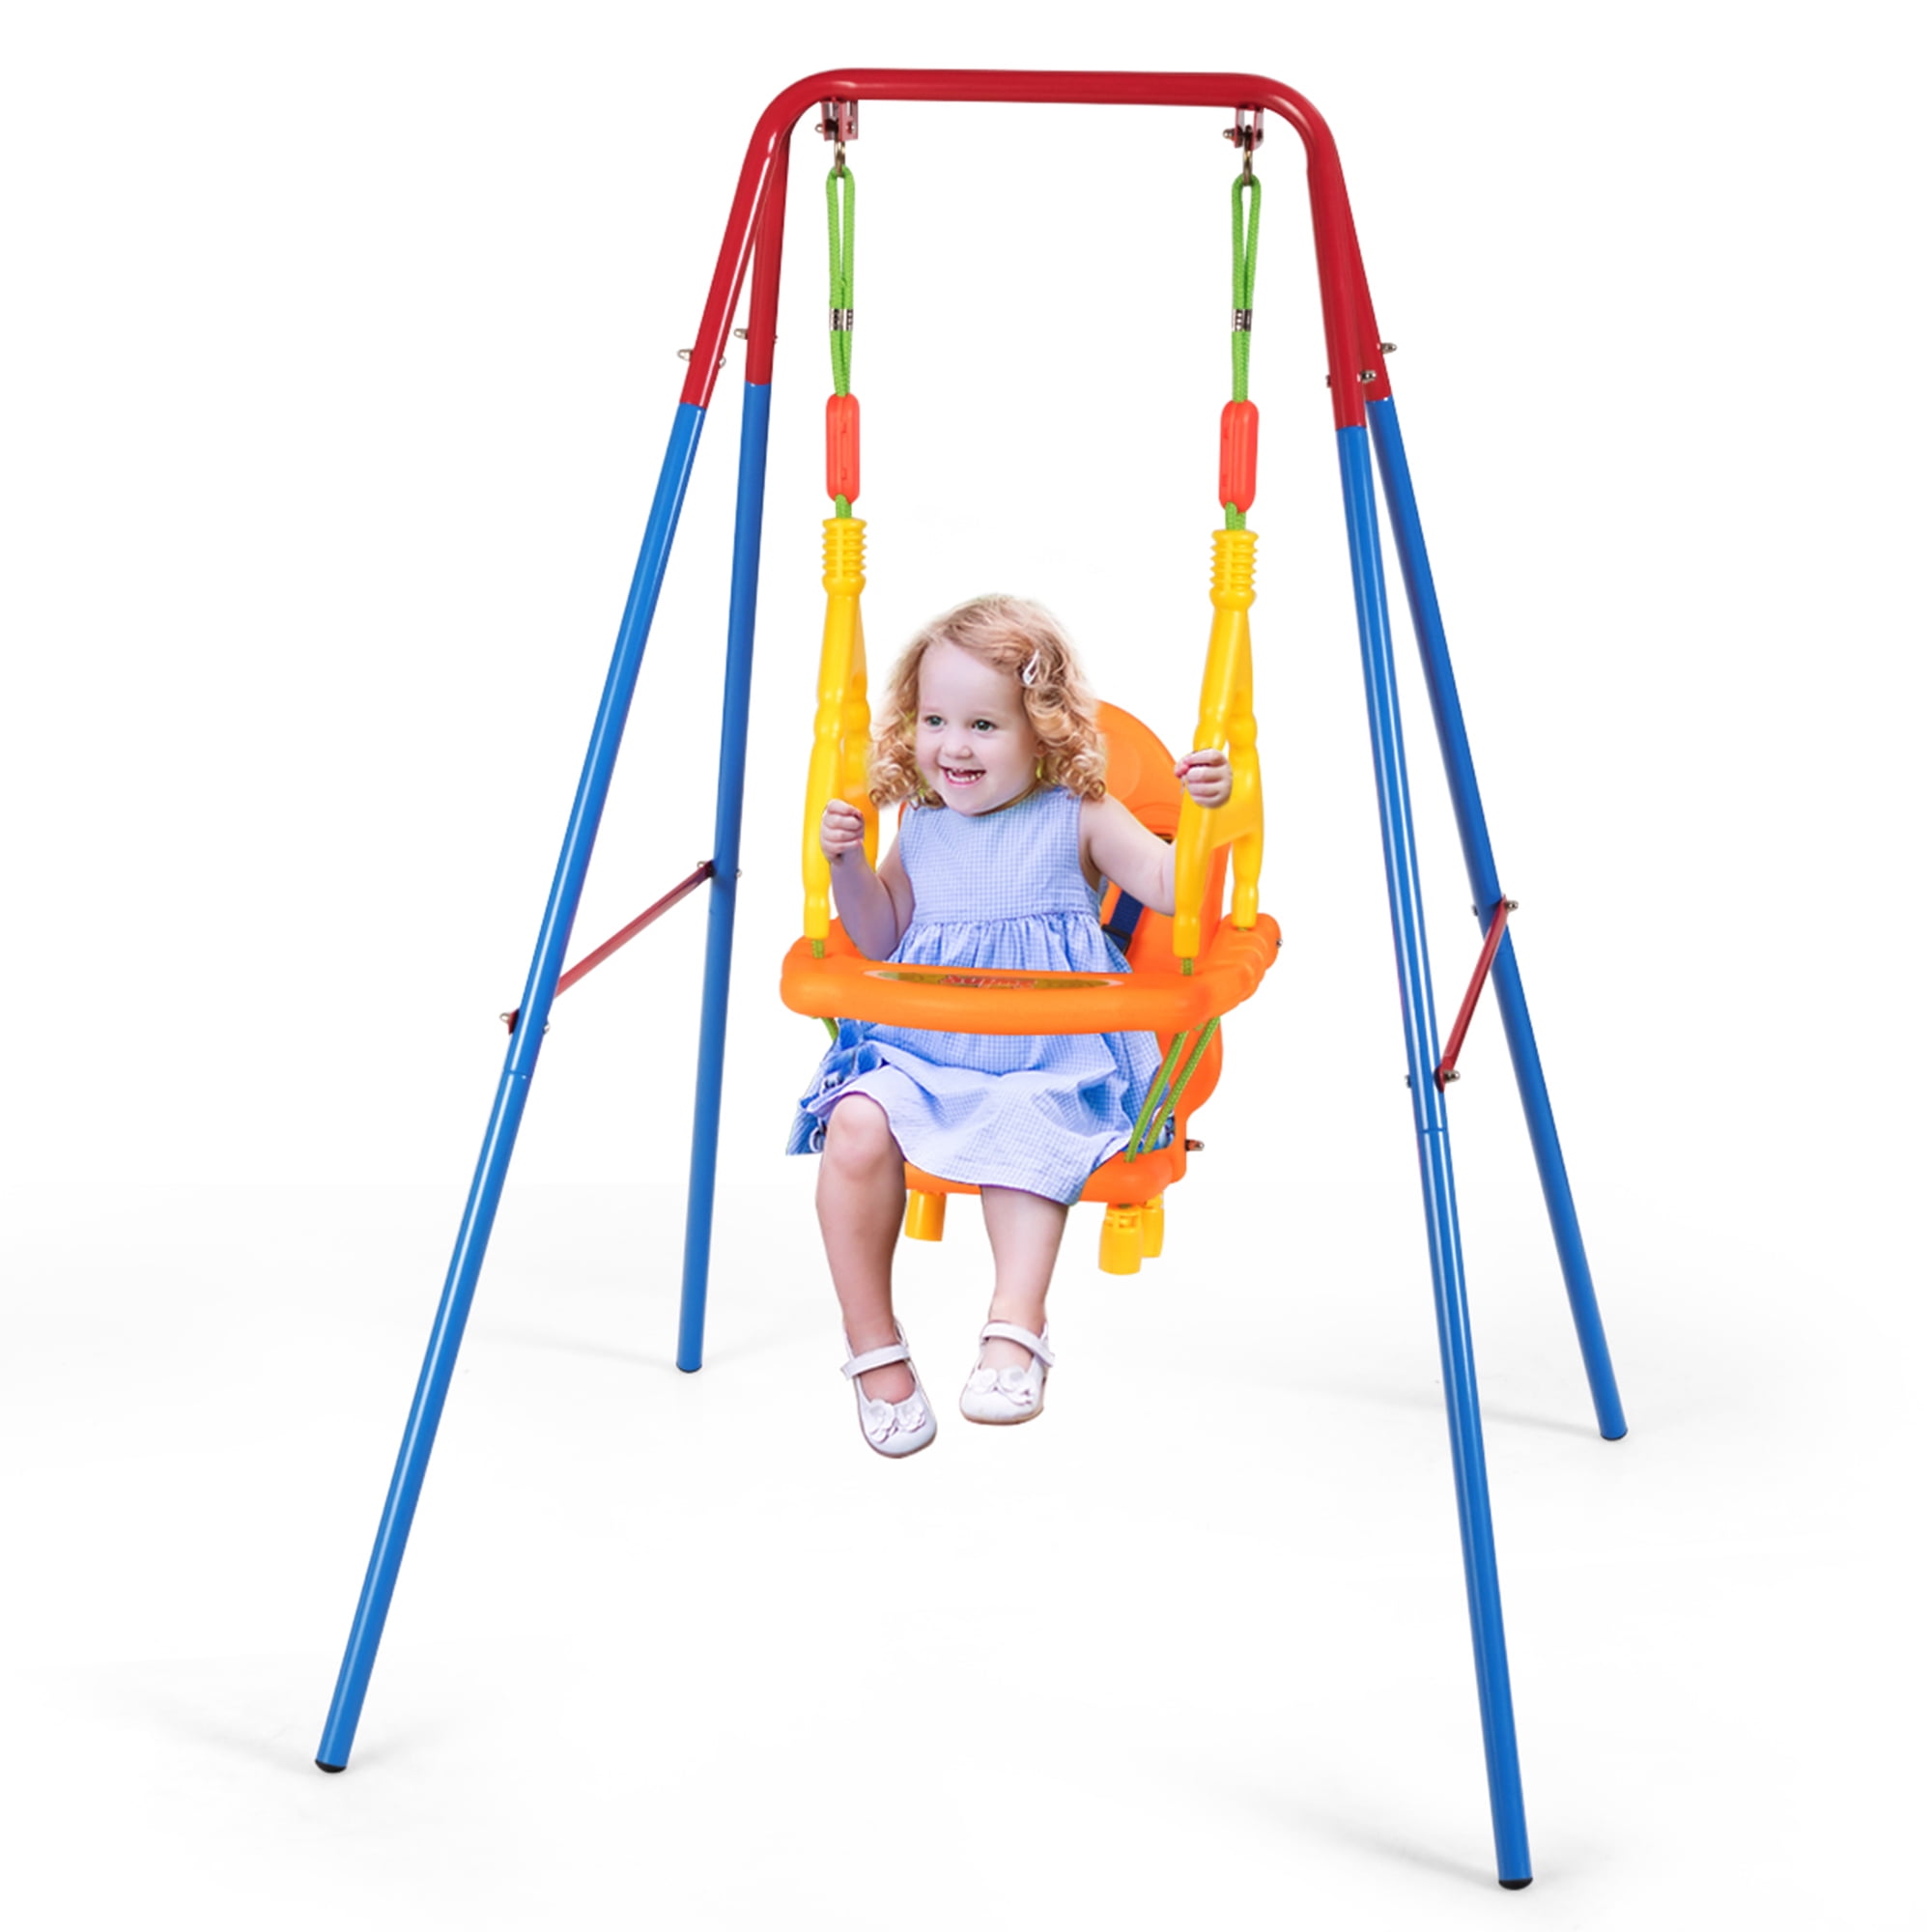 Indoor Outdoor Portable Baby Toddler Swing Set Kid Child Safety Playground Seat 